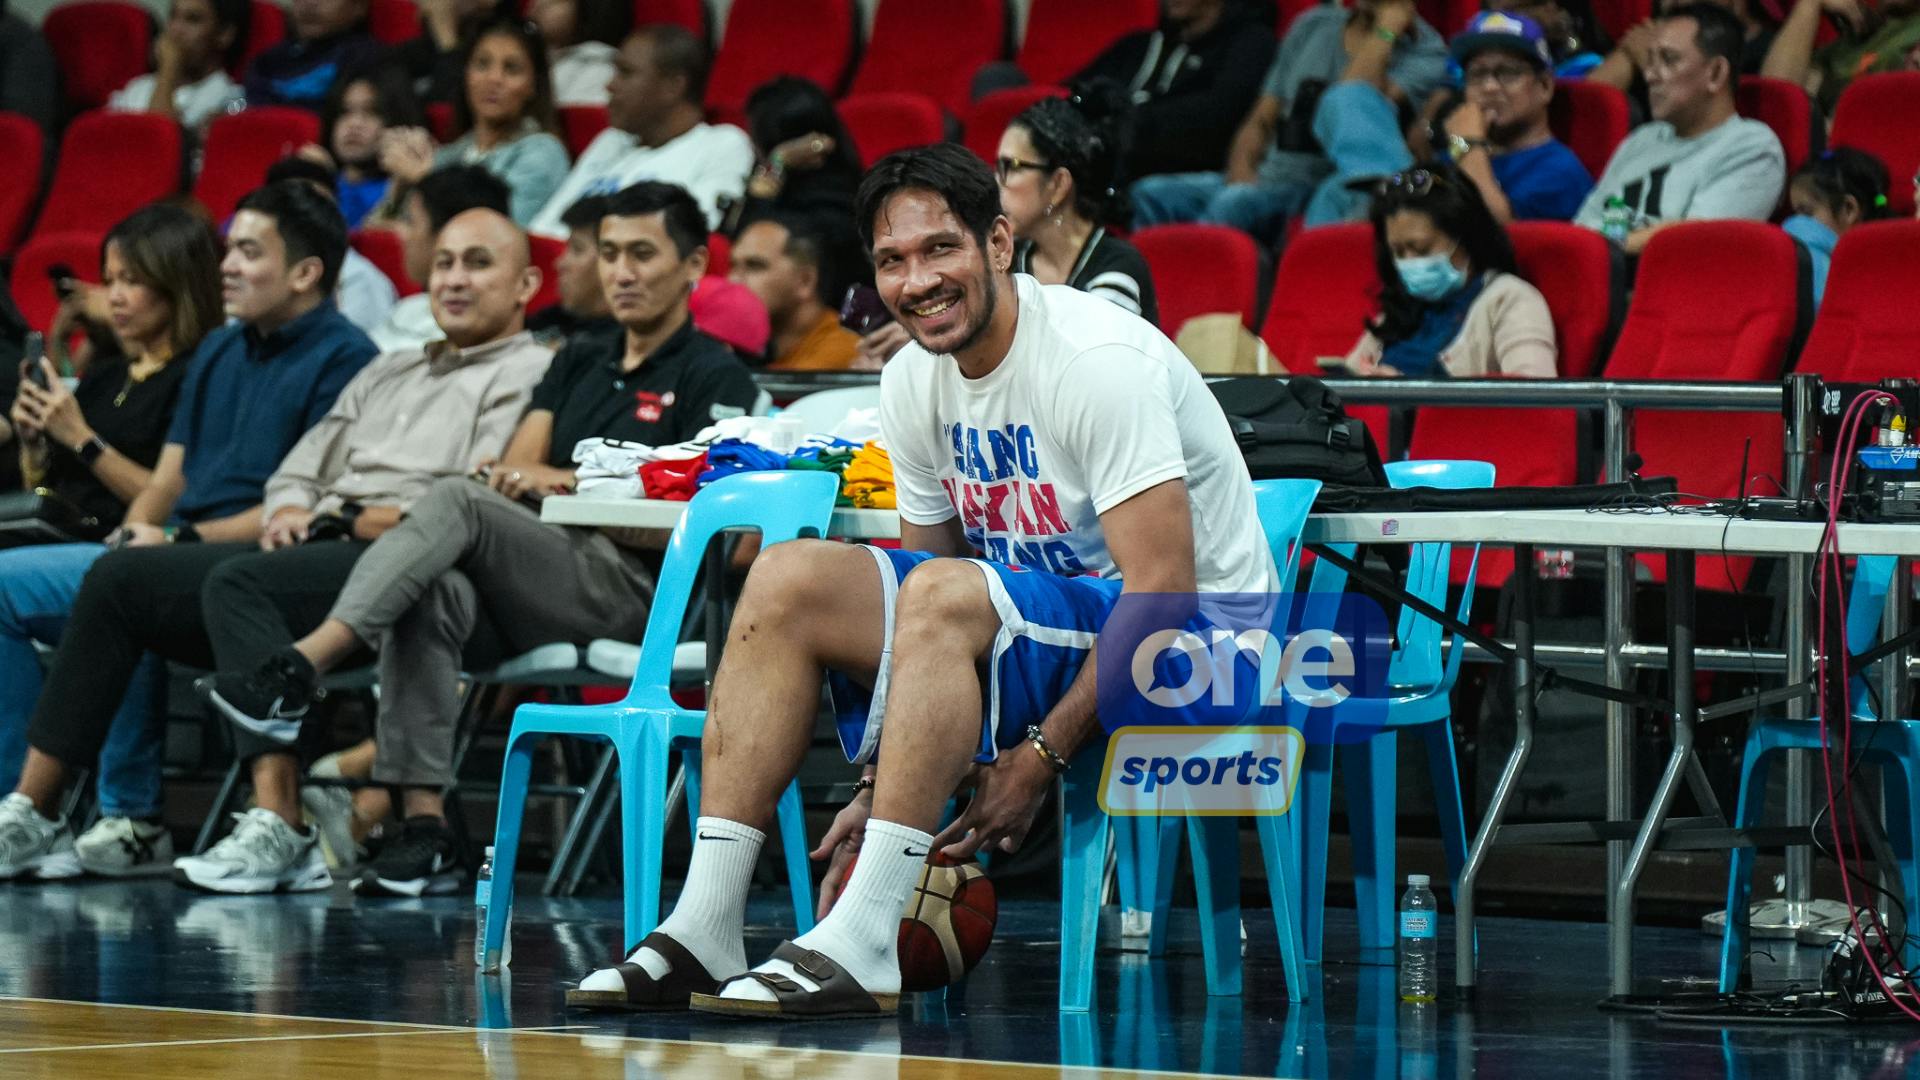 June Mar Fajardo asked to rest for two weeks due to calf injury